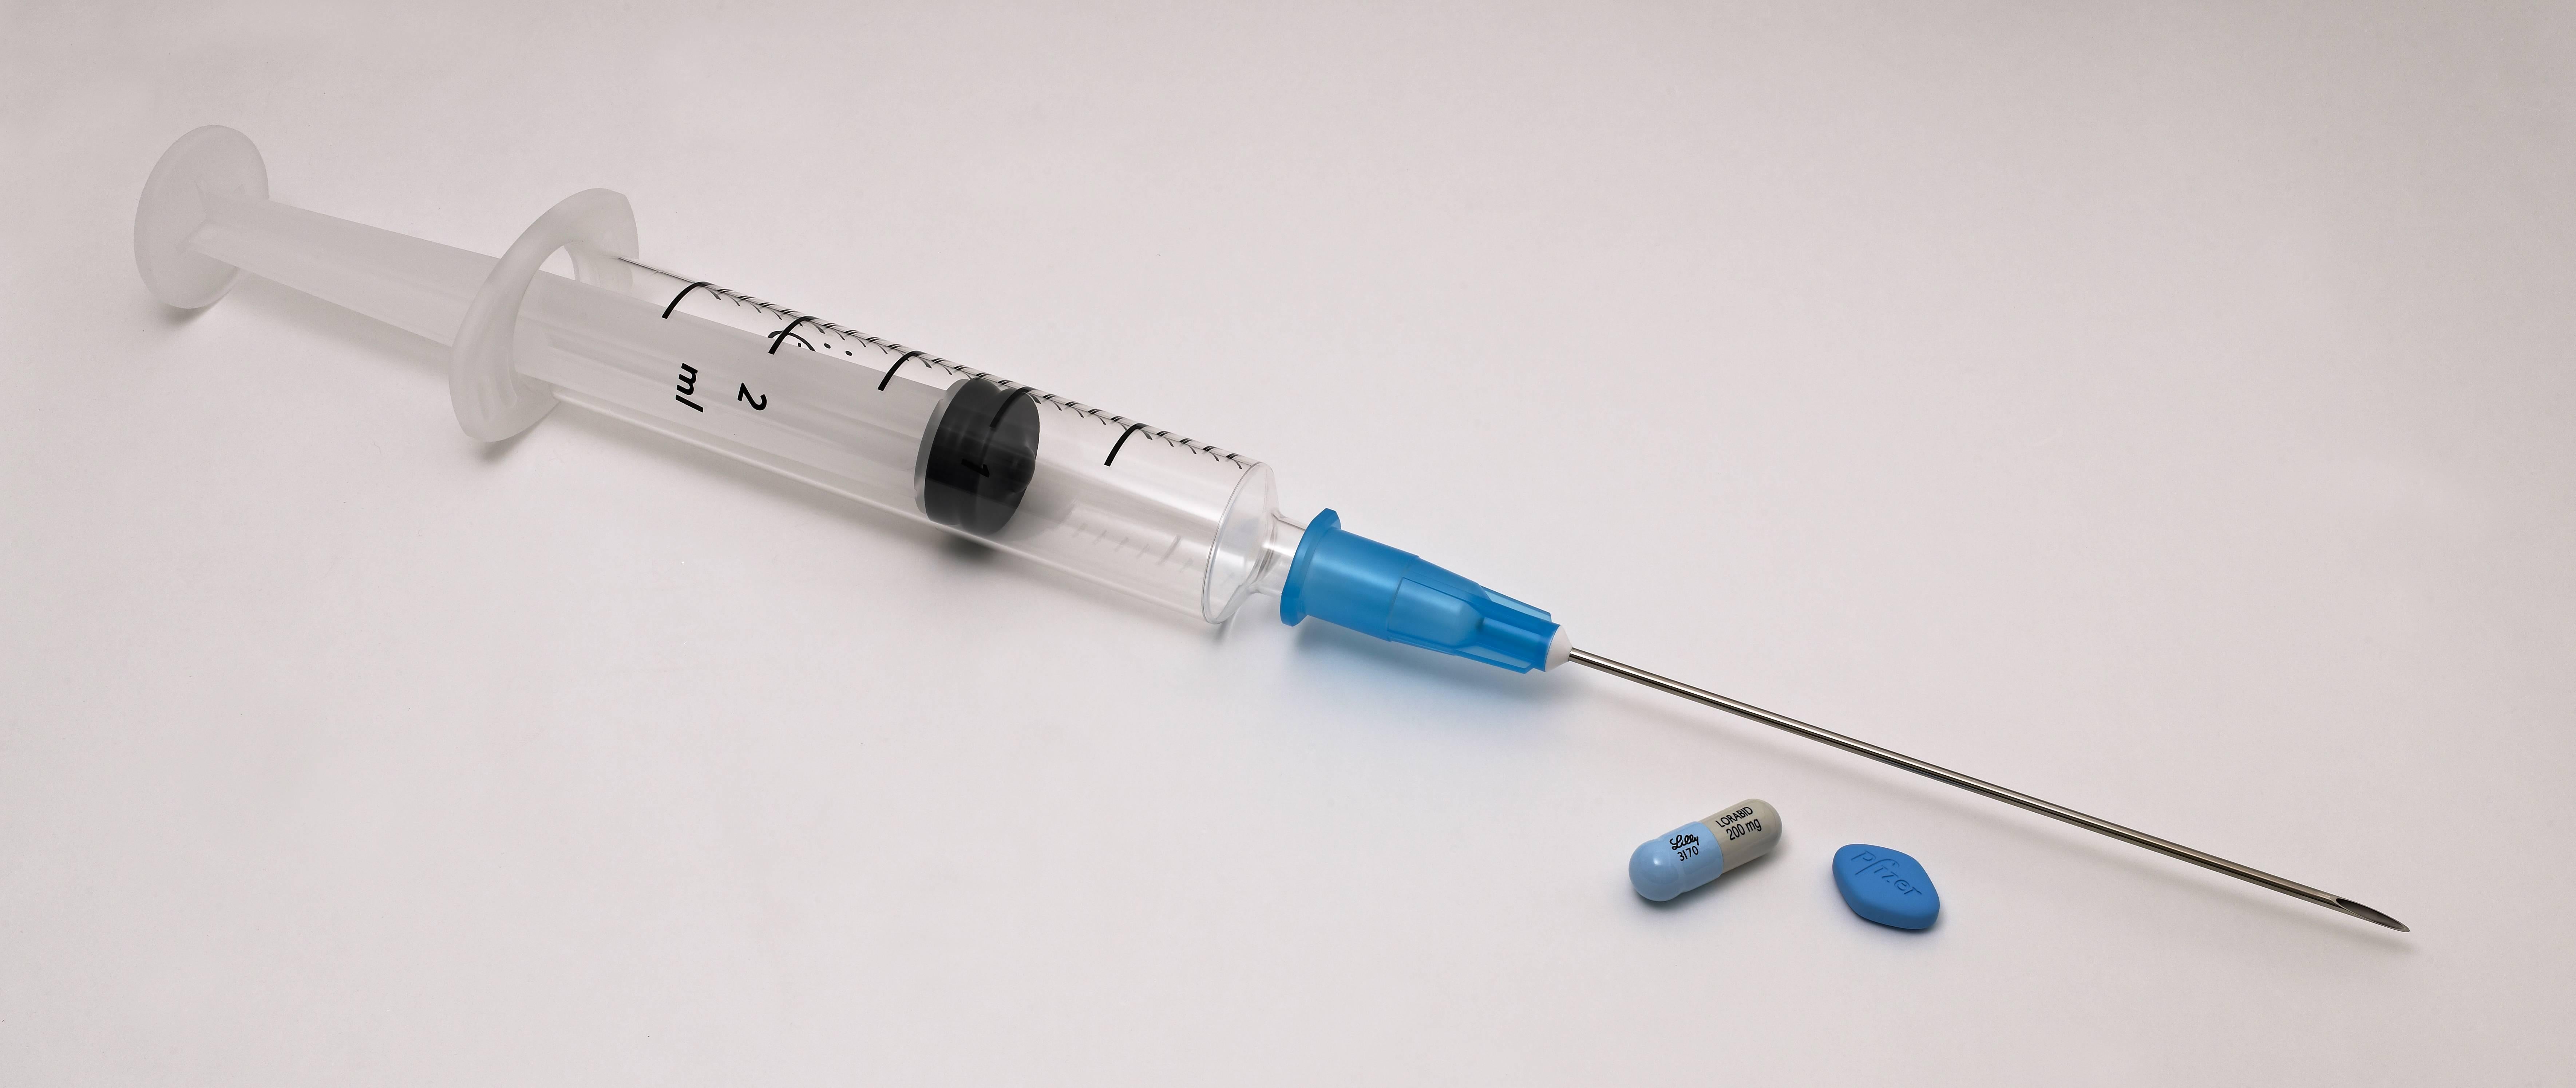 Syringe with needle 2ml sterile - Sculpture by Damien Hirst